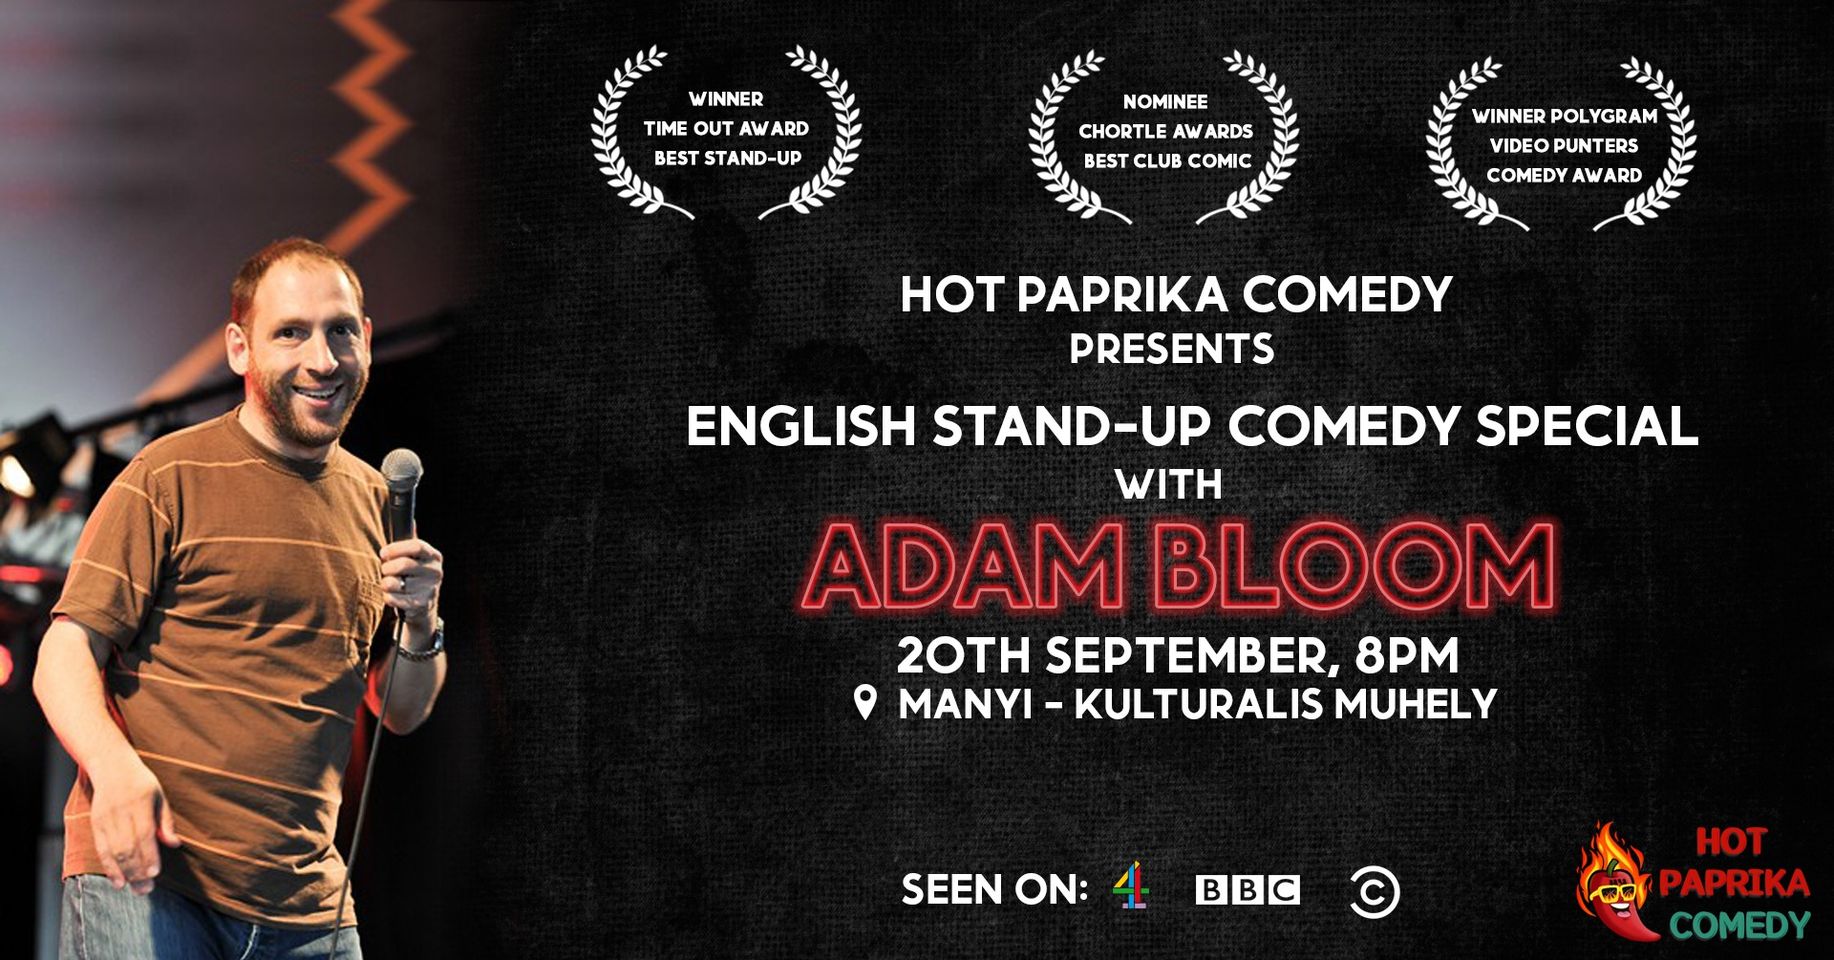 English Stand-Up Comedy Special with Adam Bloom, Manyi Kulturális Műhely Budapest, 20 September